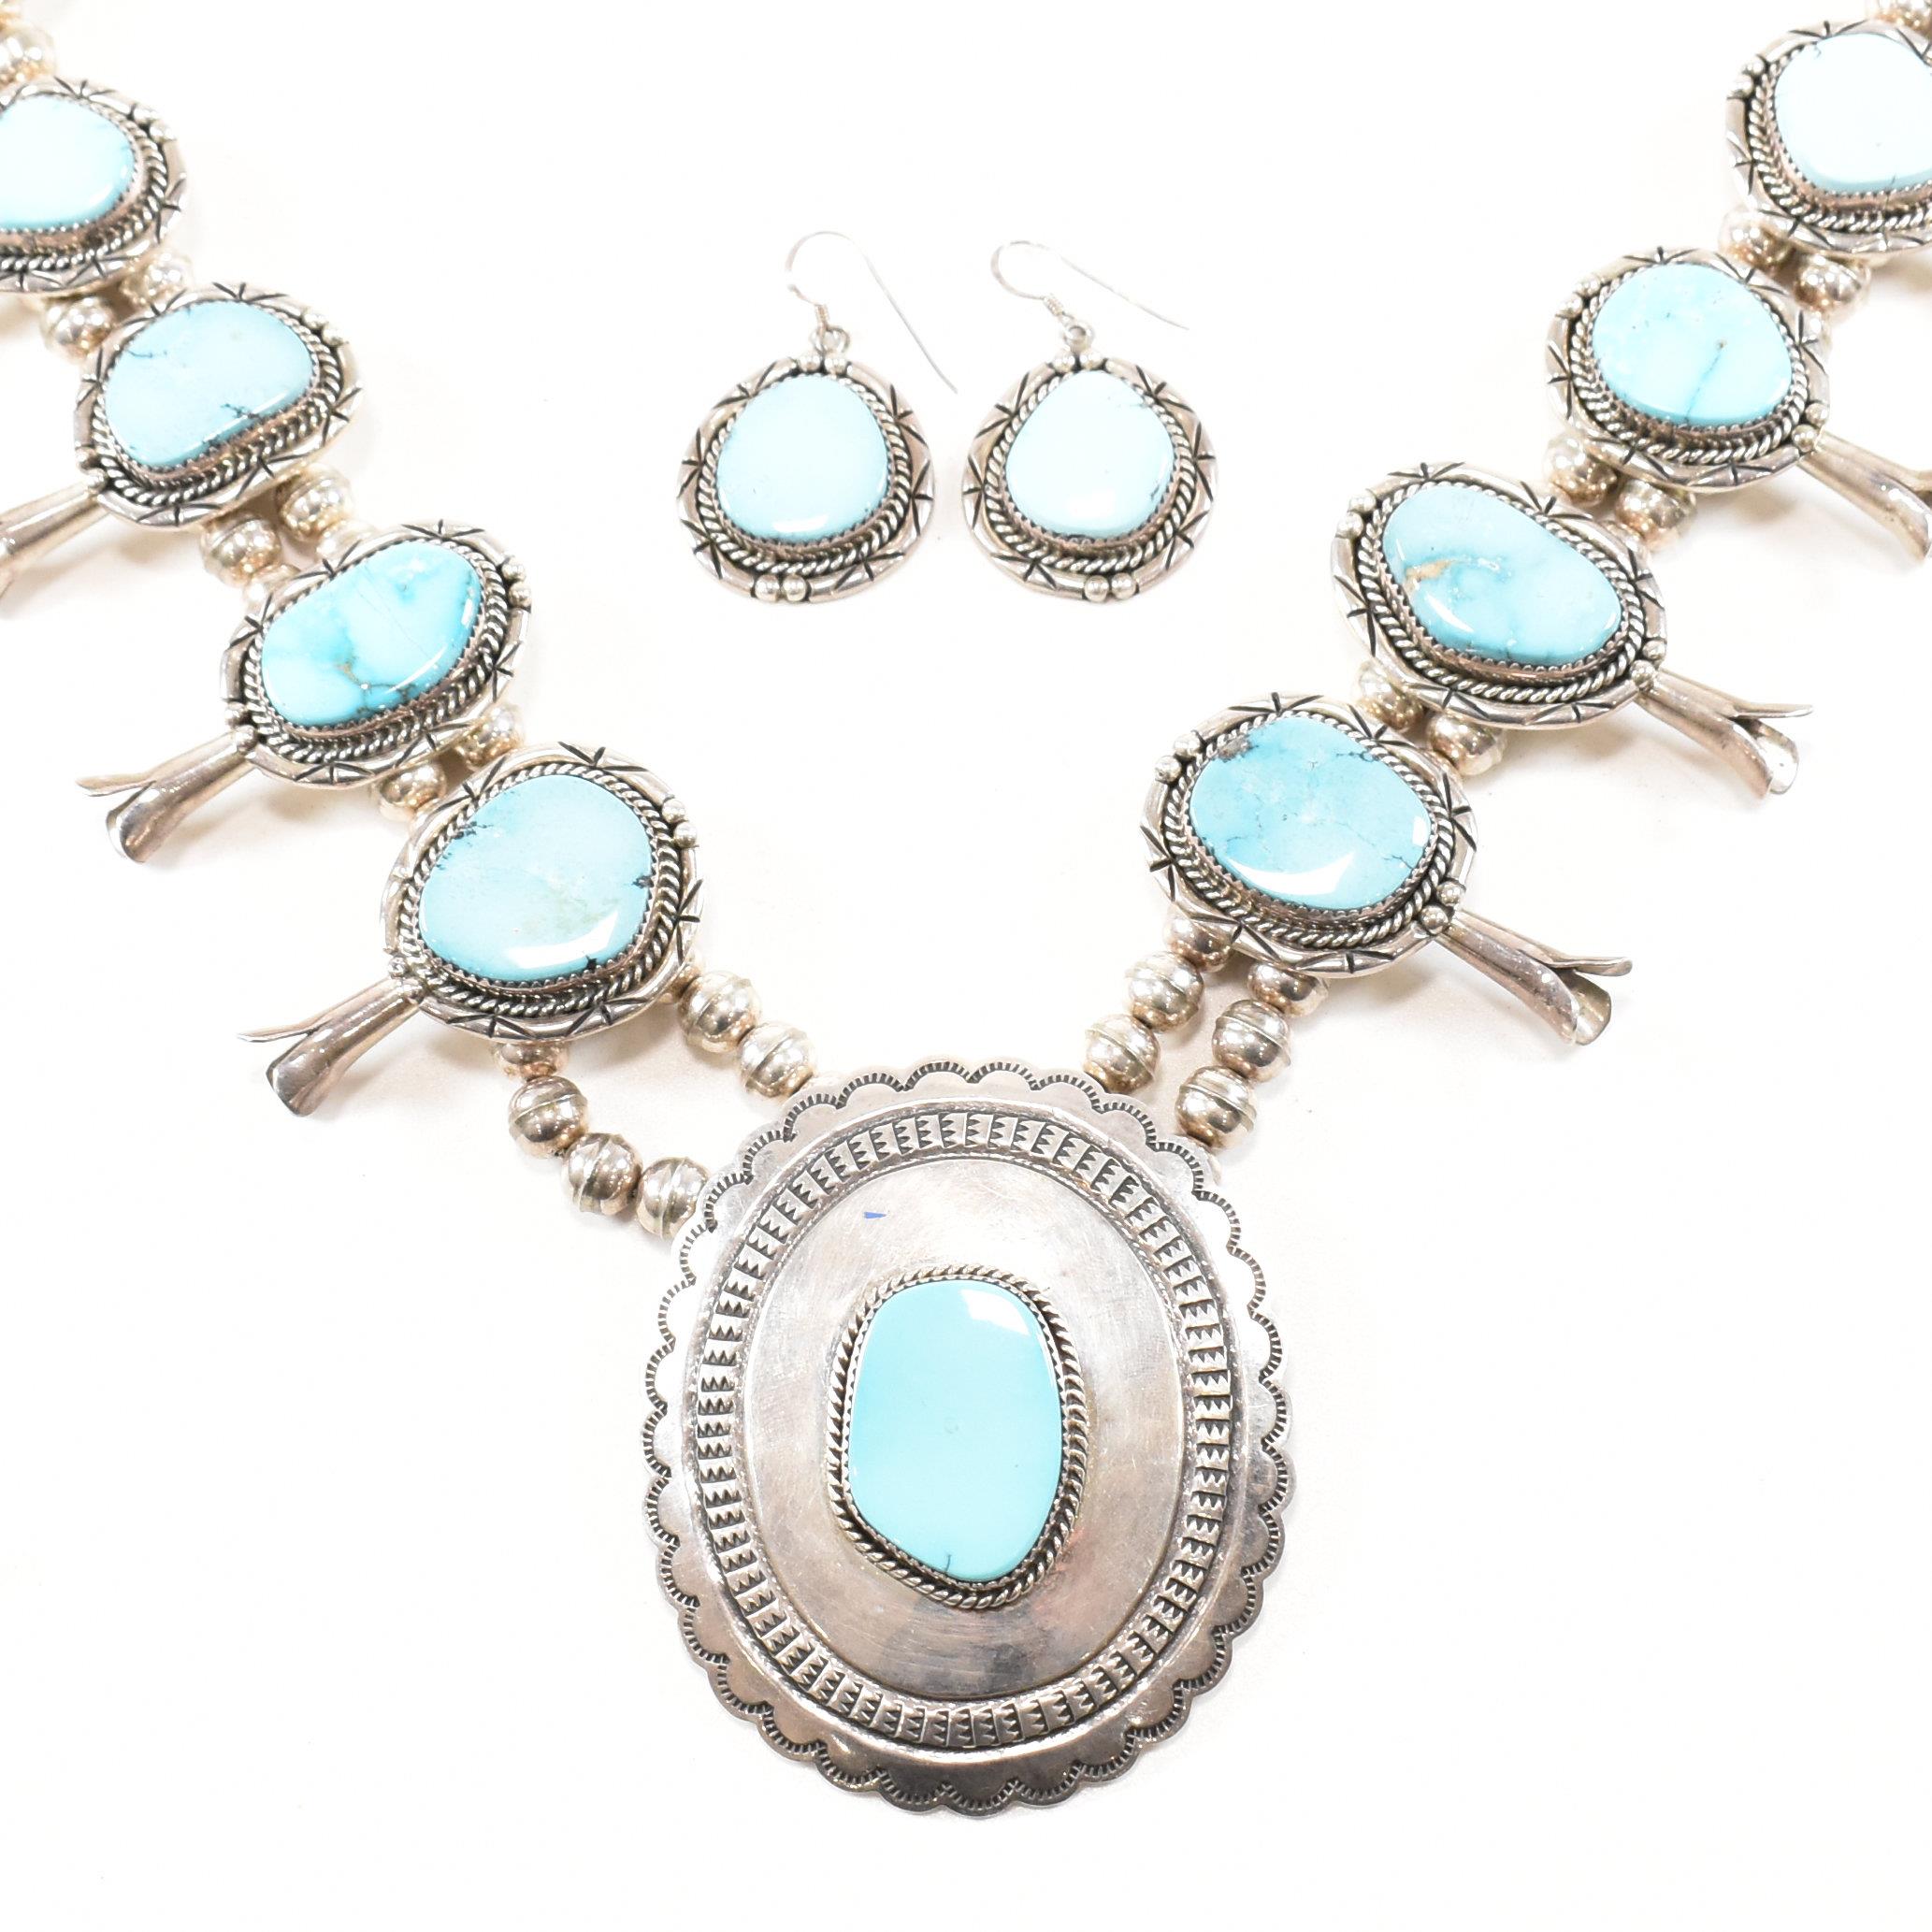 VINTAGE NAVAJO NATIVE FRED GUERRO STERLING SILVER & TURQUOISE DEMI PARURE - Image 2 of 11